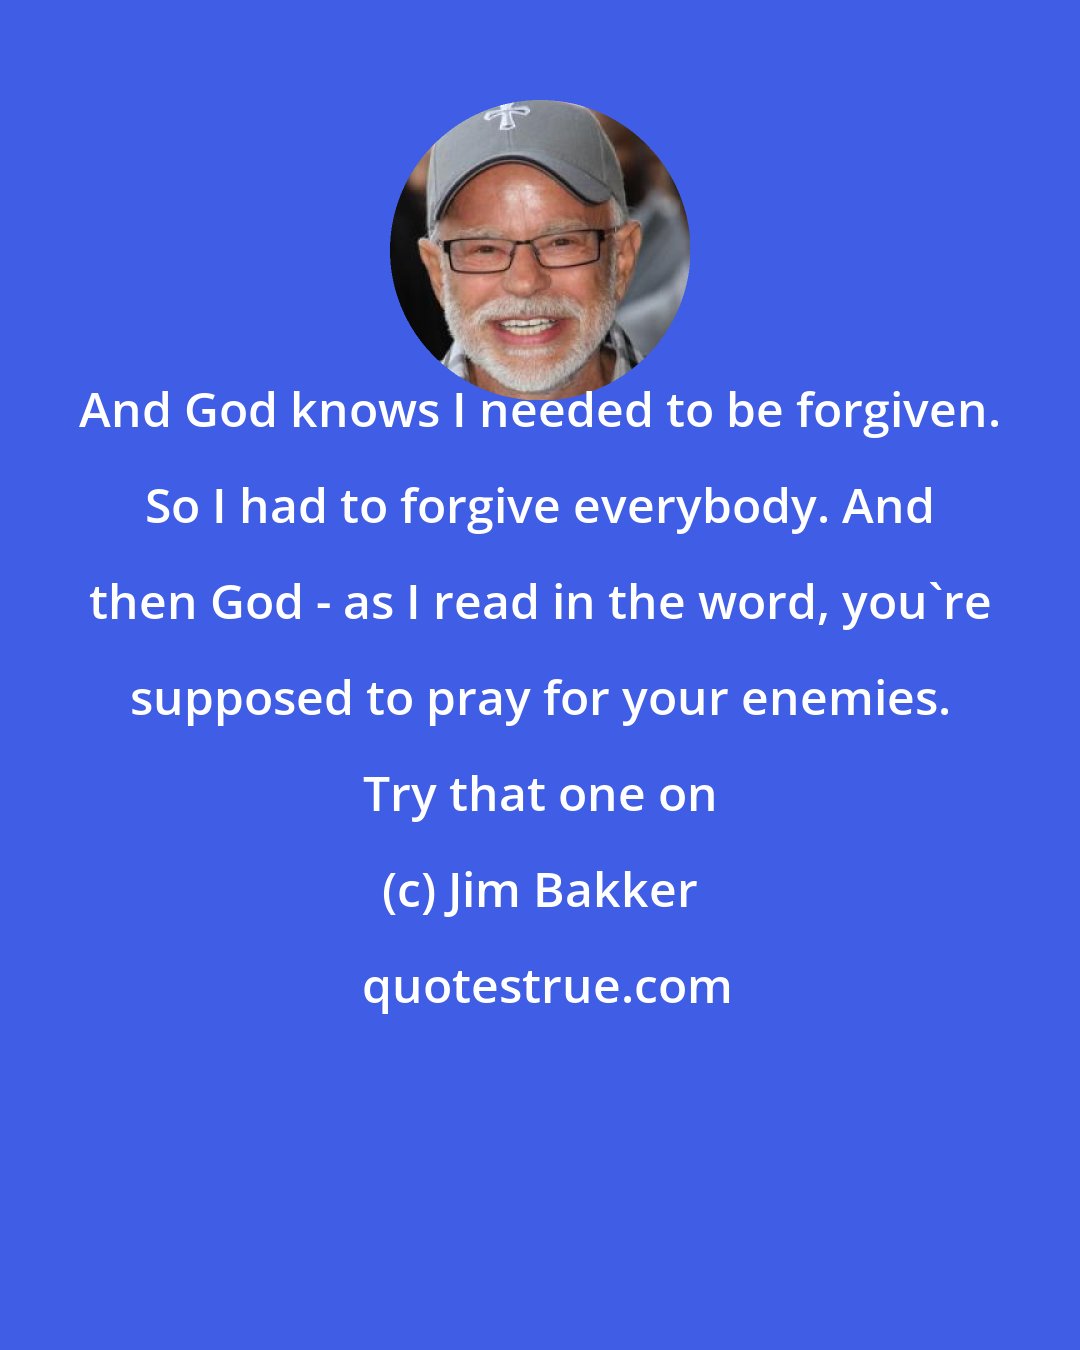 Jim Bakker: And God knows I needed to be forgiven. So I had to forgive everybody. And then God - as I read in the word, you're supposed to pray for your enemies. Try that one on